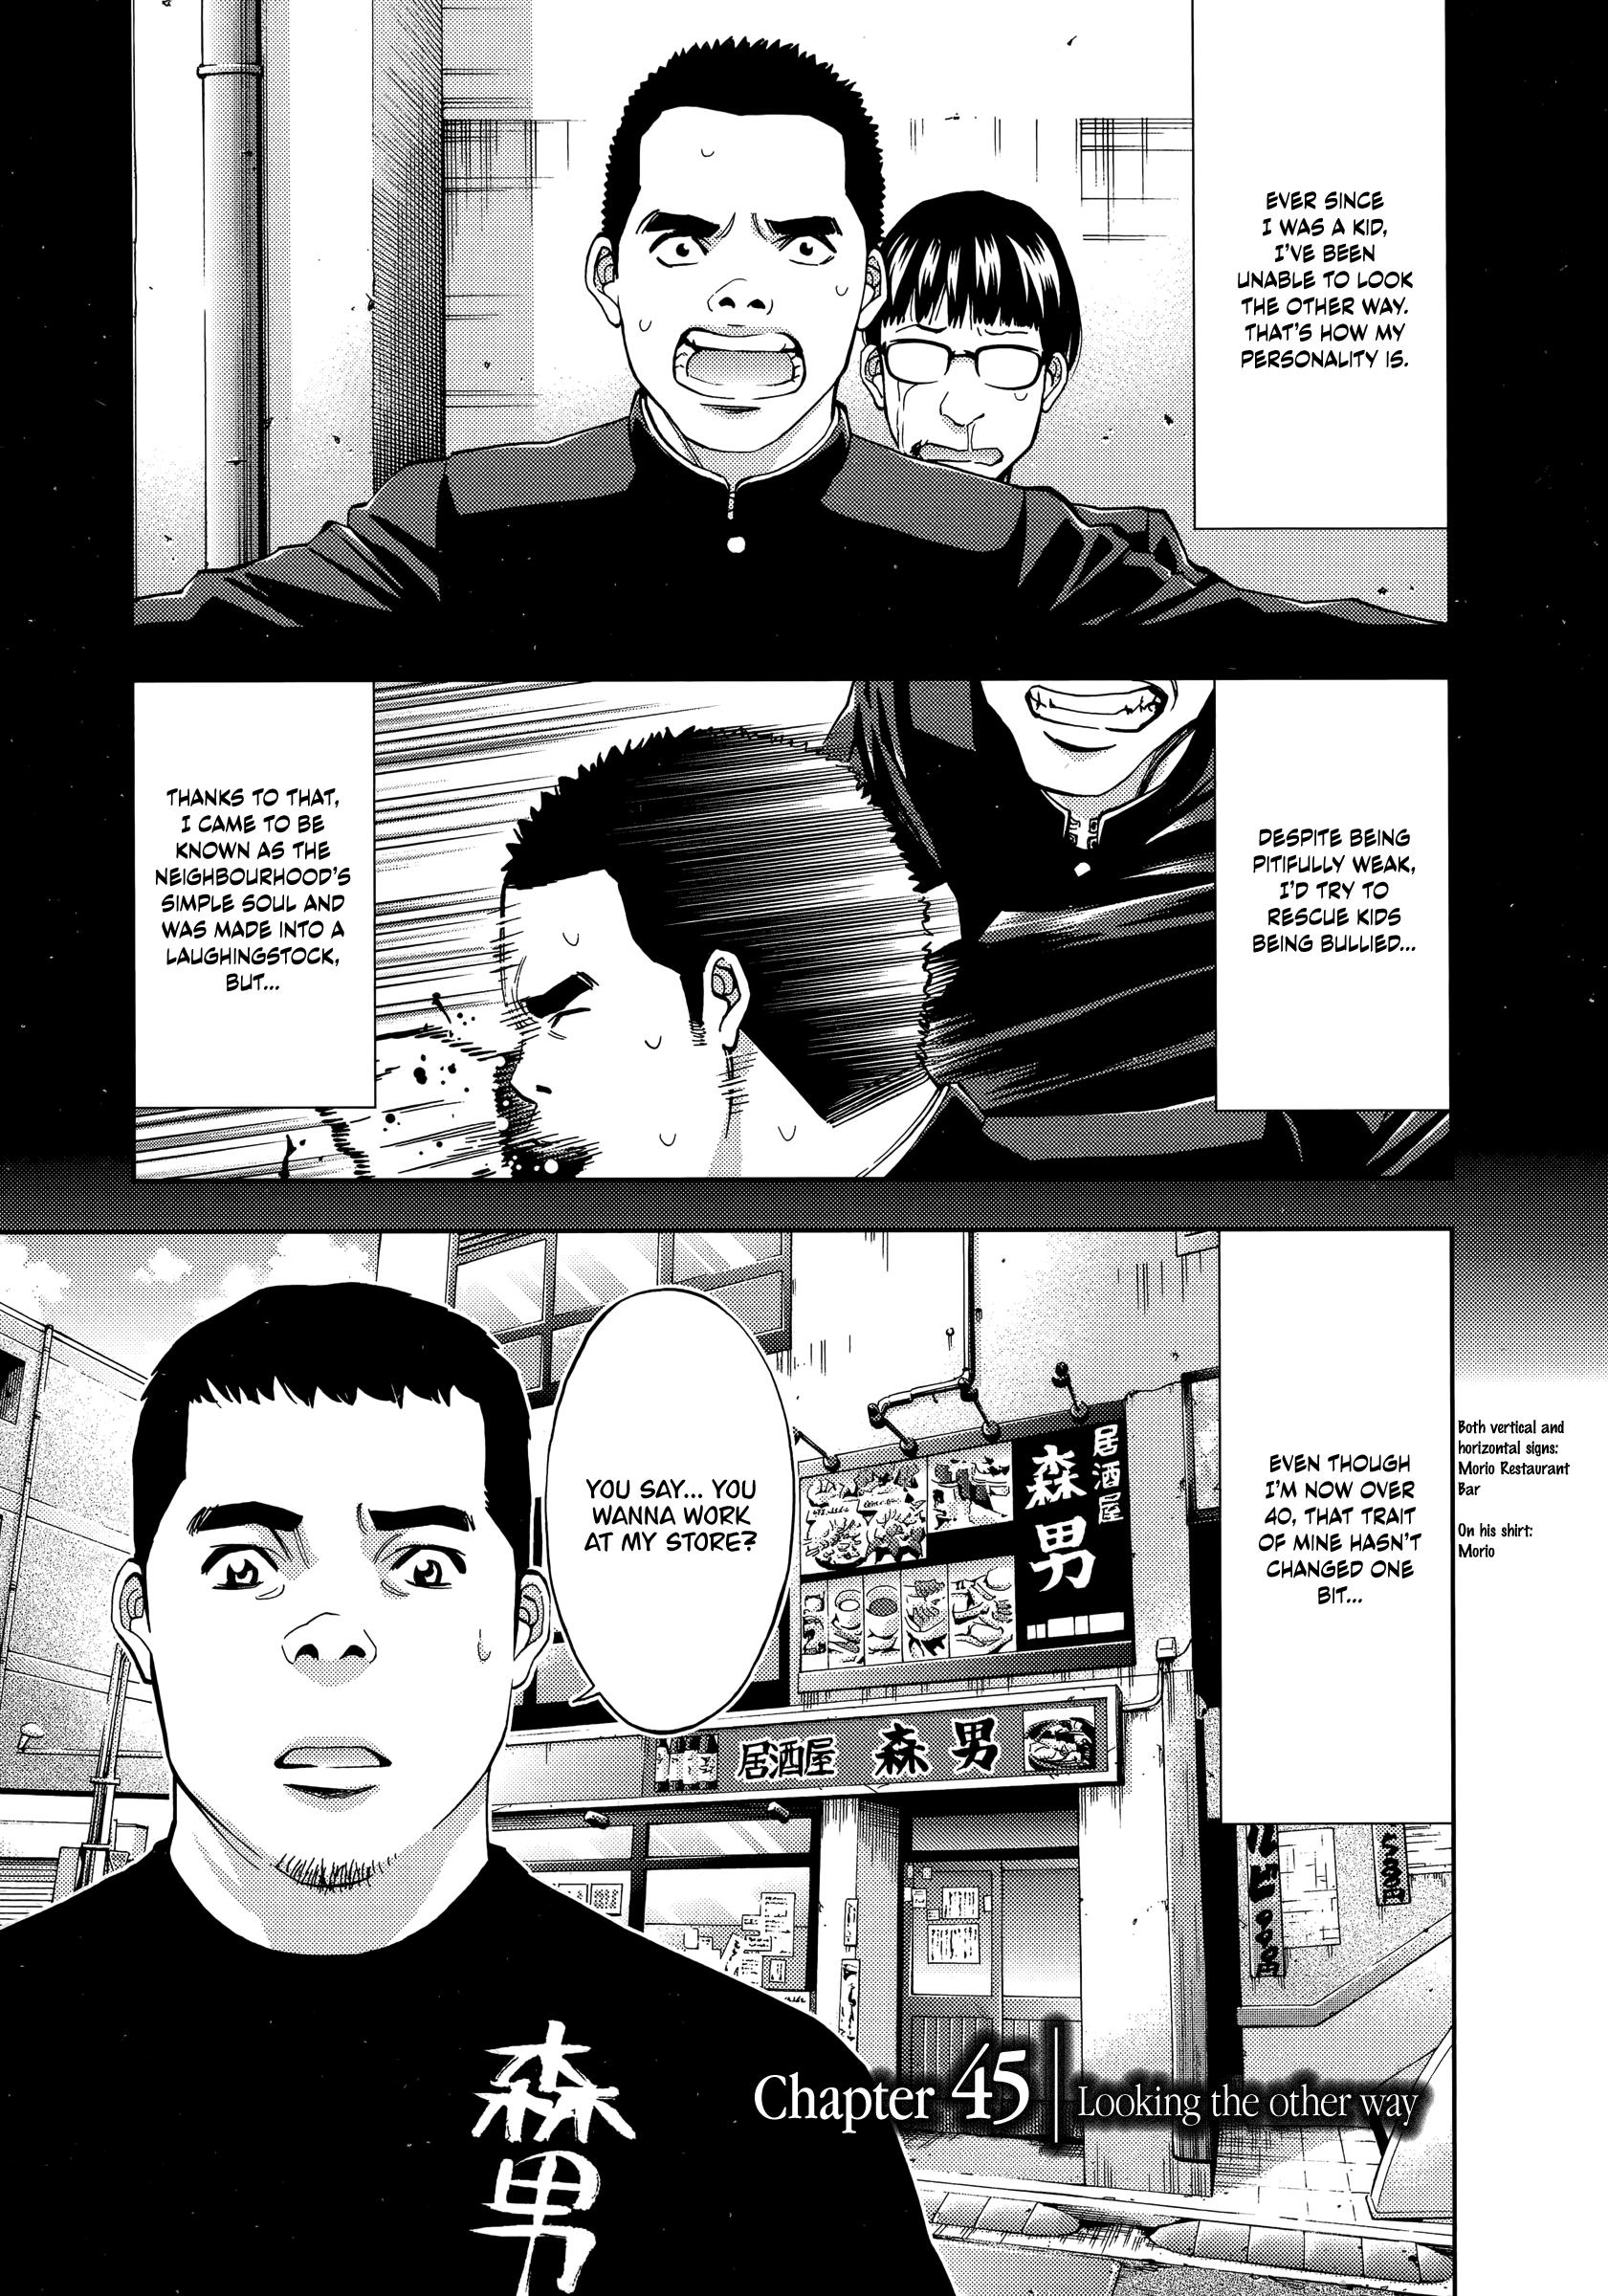 Funouhan Vol.7 Chapter 45: Looking The Other Way - Picture 1